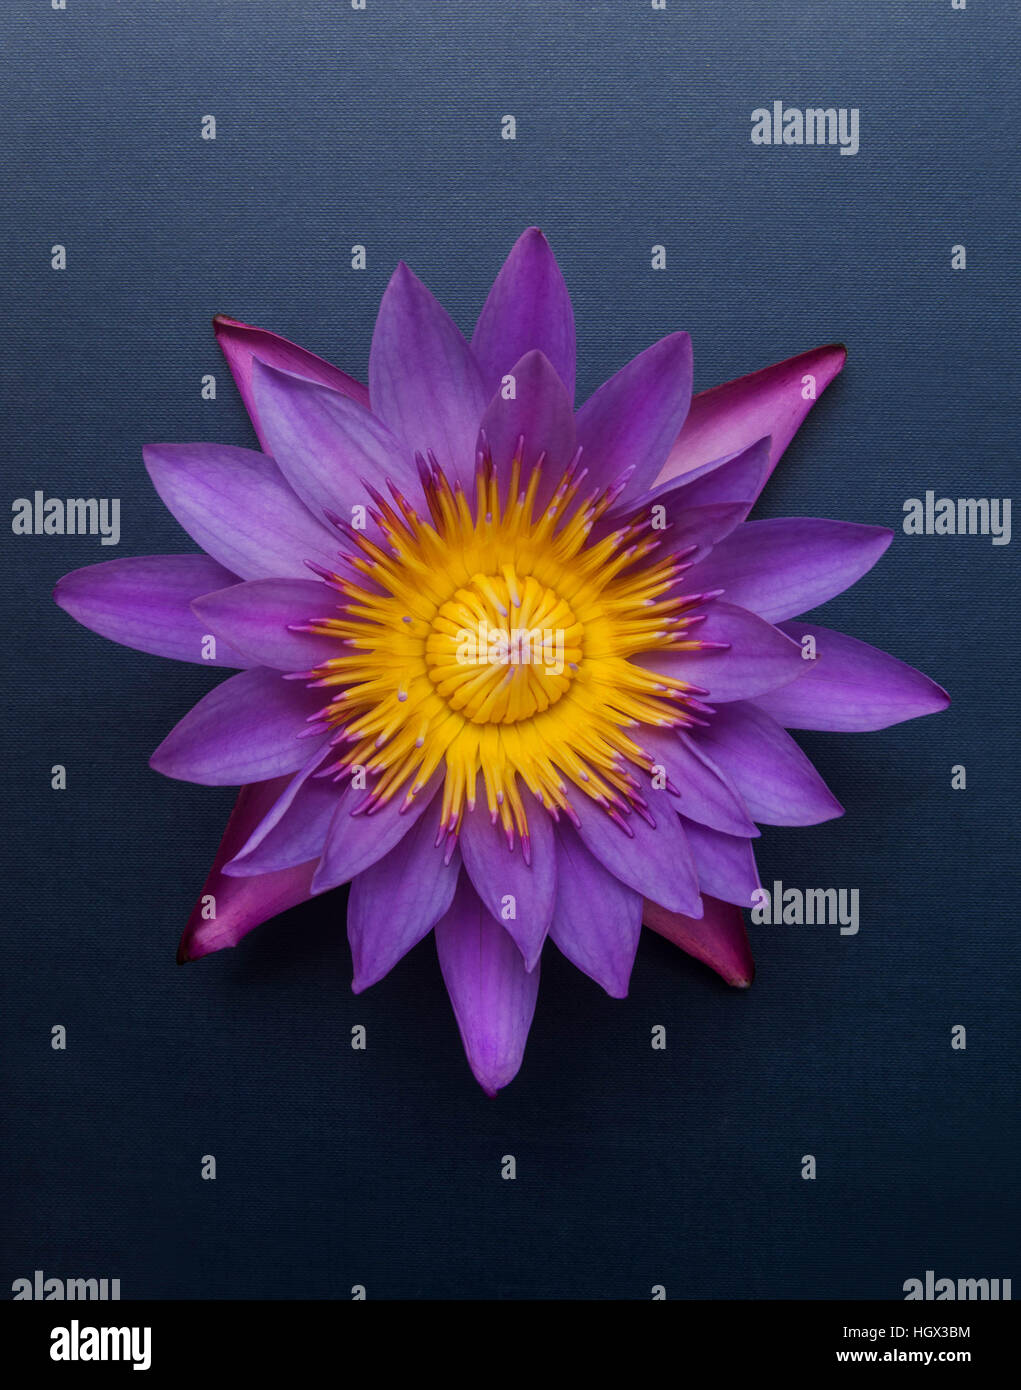 The Lotus, a flower that is often used as an offering to be left inside a Buddhist temple. Most commonly grown in water. Stock Photo